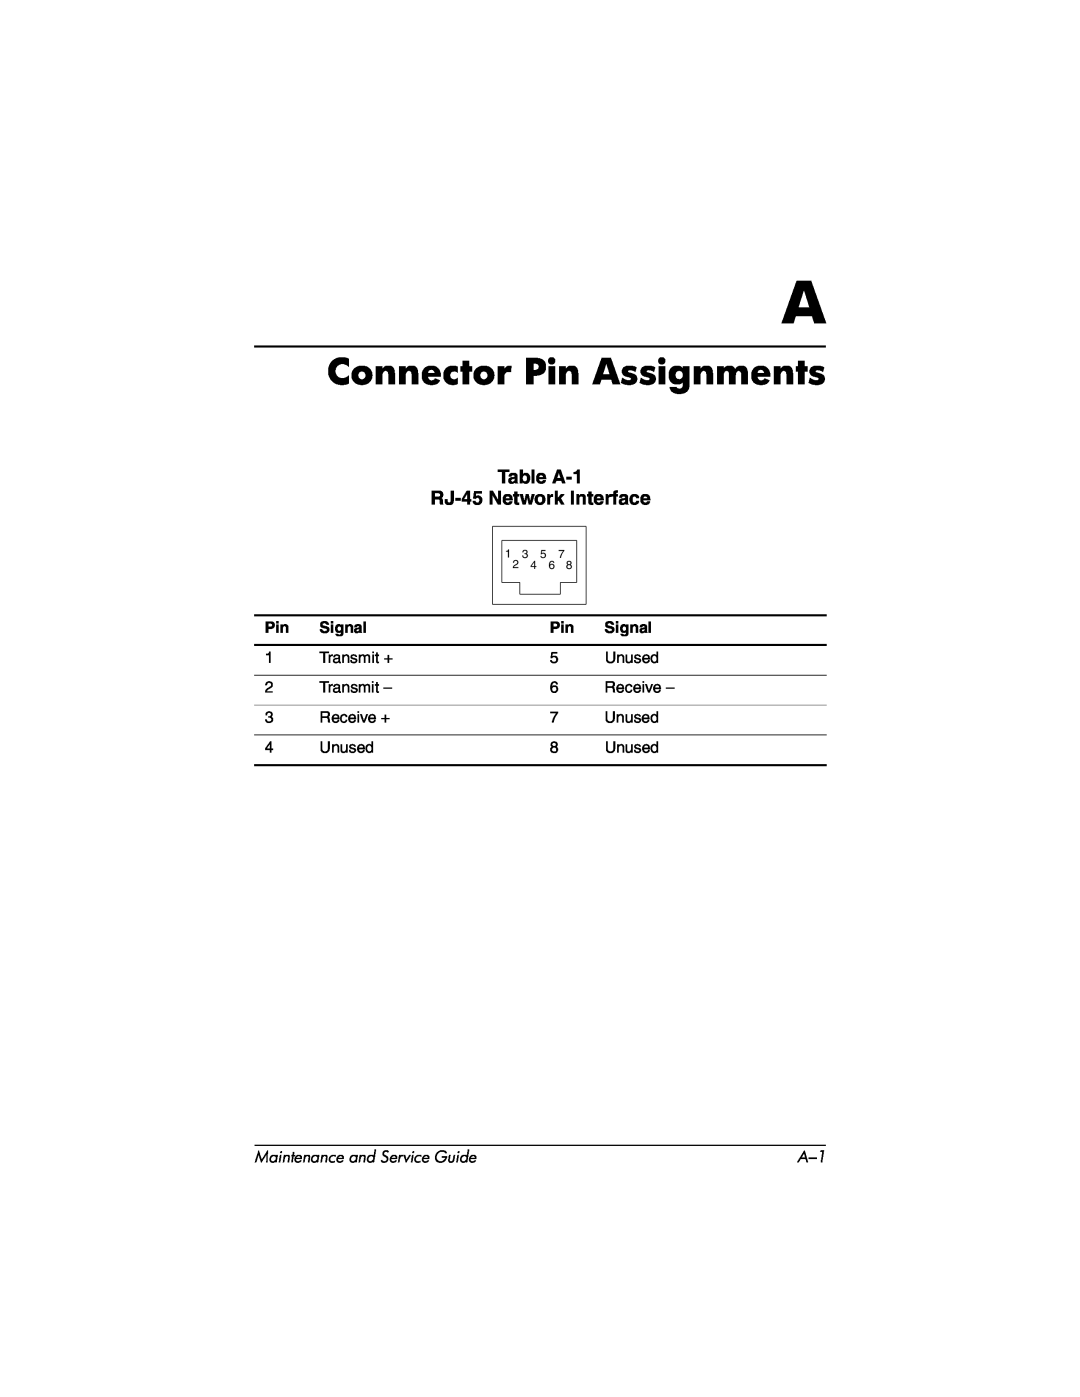 HP nx7000, X1000 manual Connector Pin Assignments, Table A-1, RJ-45 Network Interface, Signal, Maintenance and Service Guide 